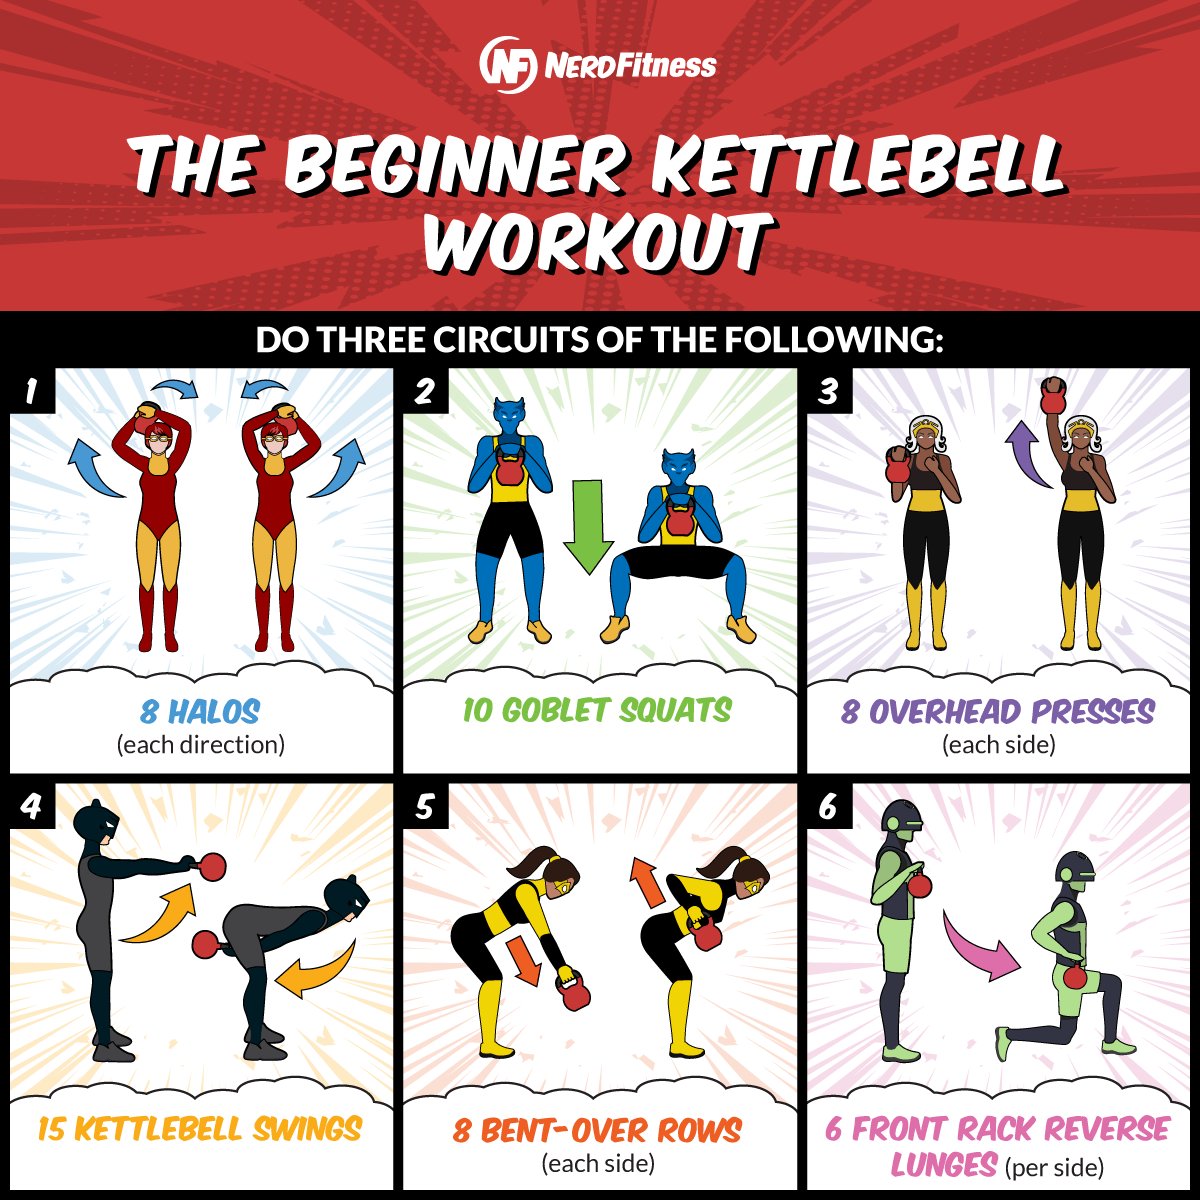 This infographic shows the 6 exercises needed for the Beginner Kettlebell Workout